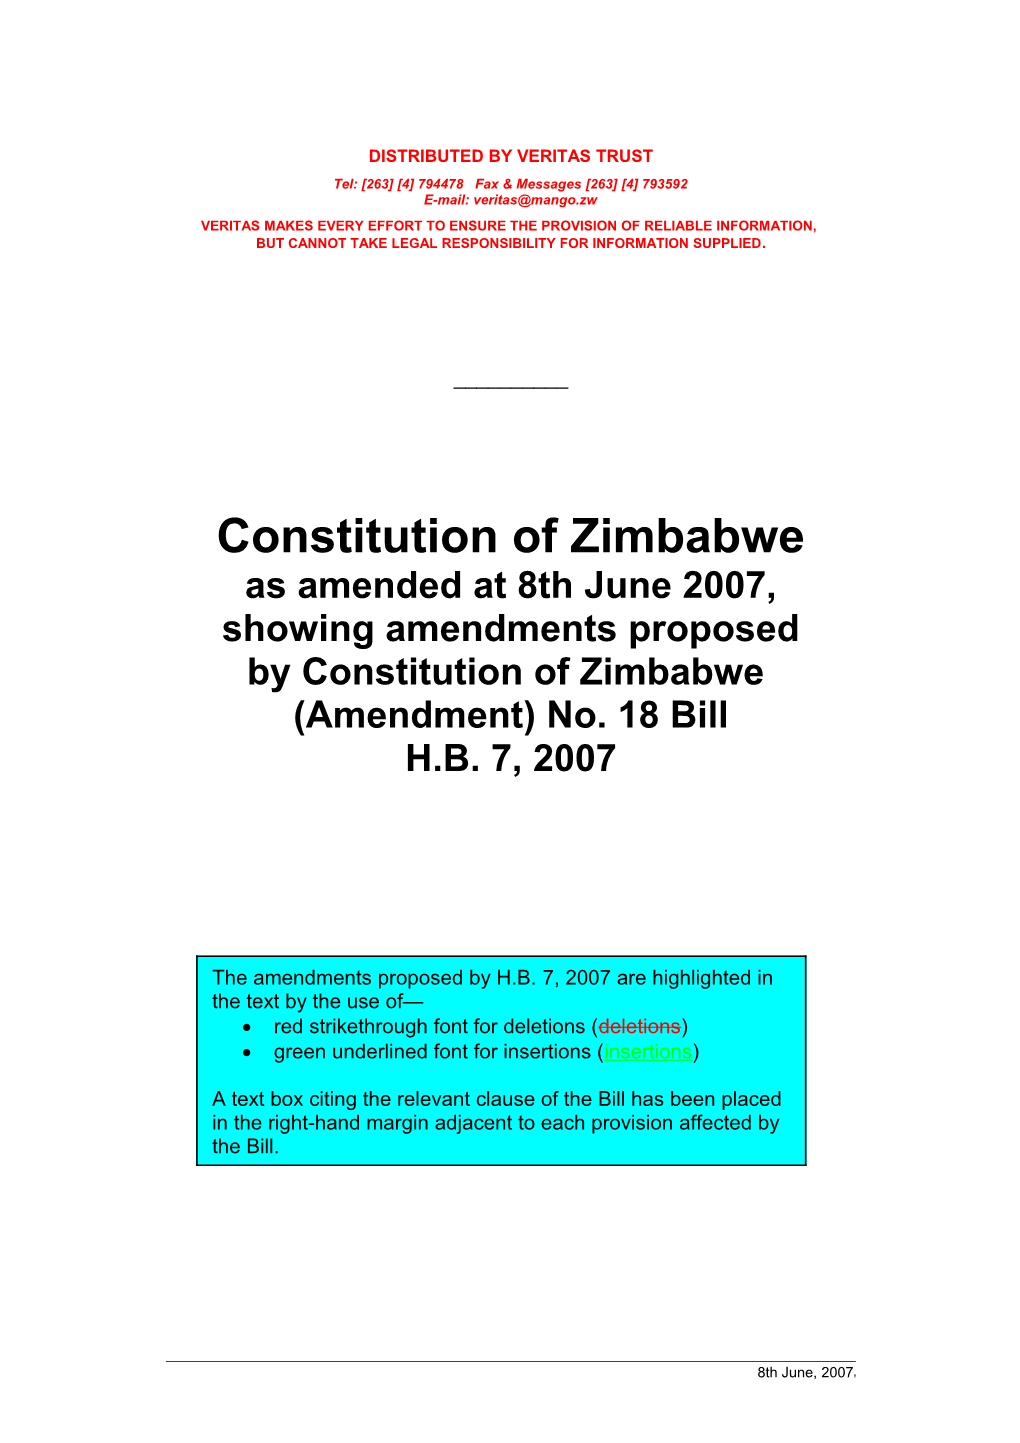 CONSTITUTION of ZIMBABWE Showing Amendments Proposed by Amendment No. 18